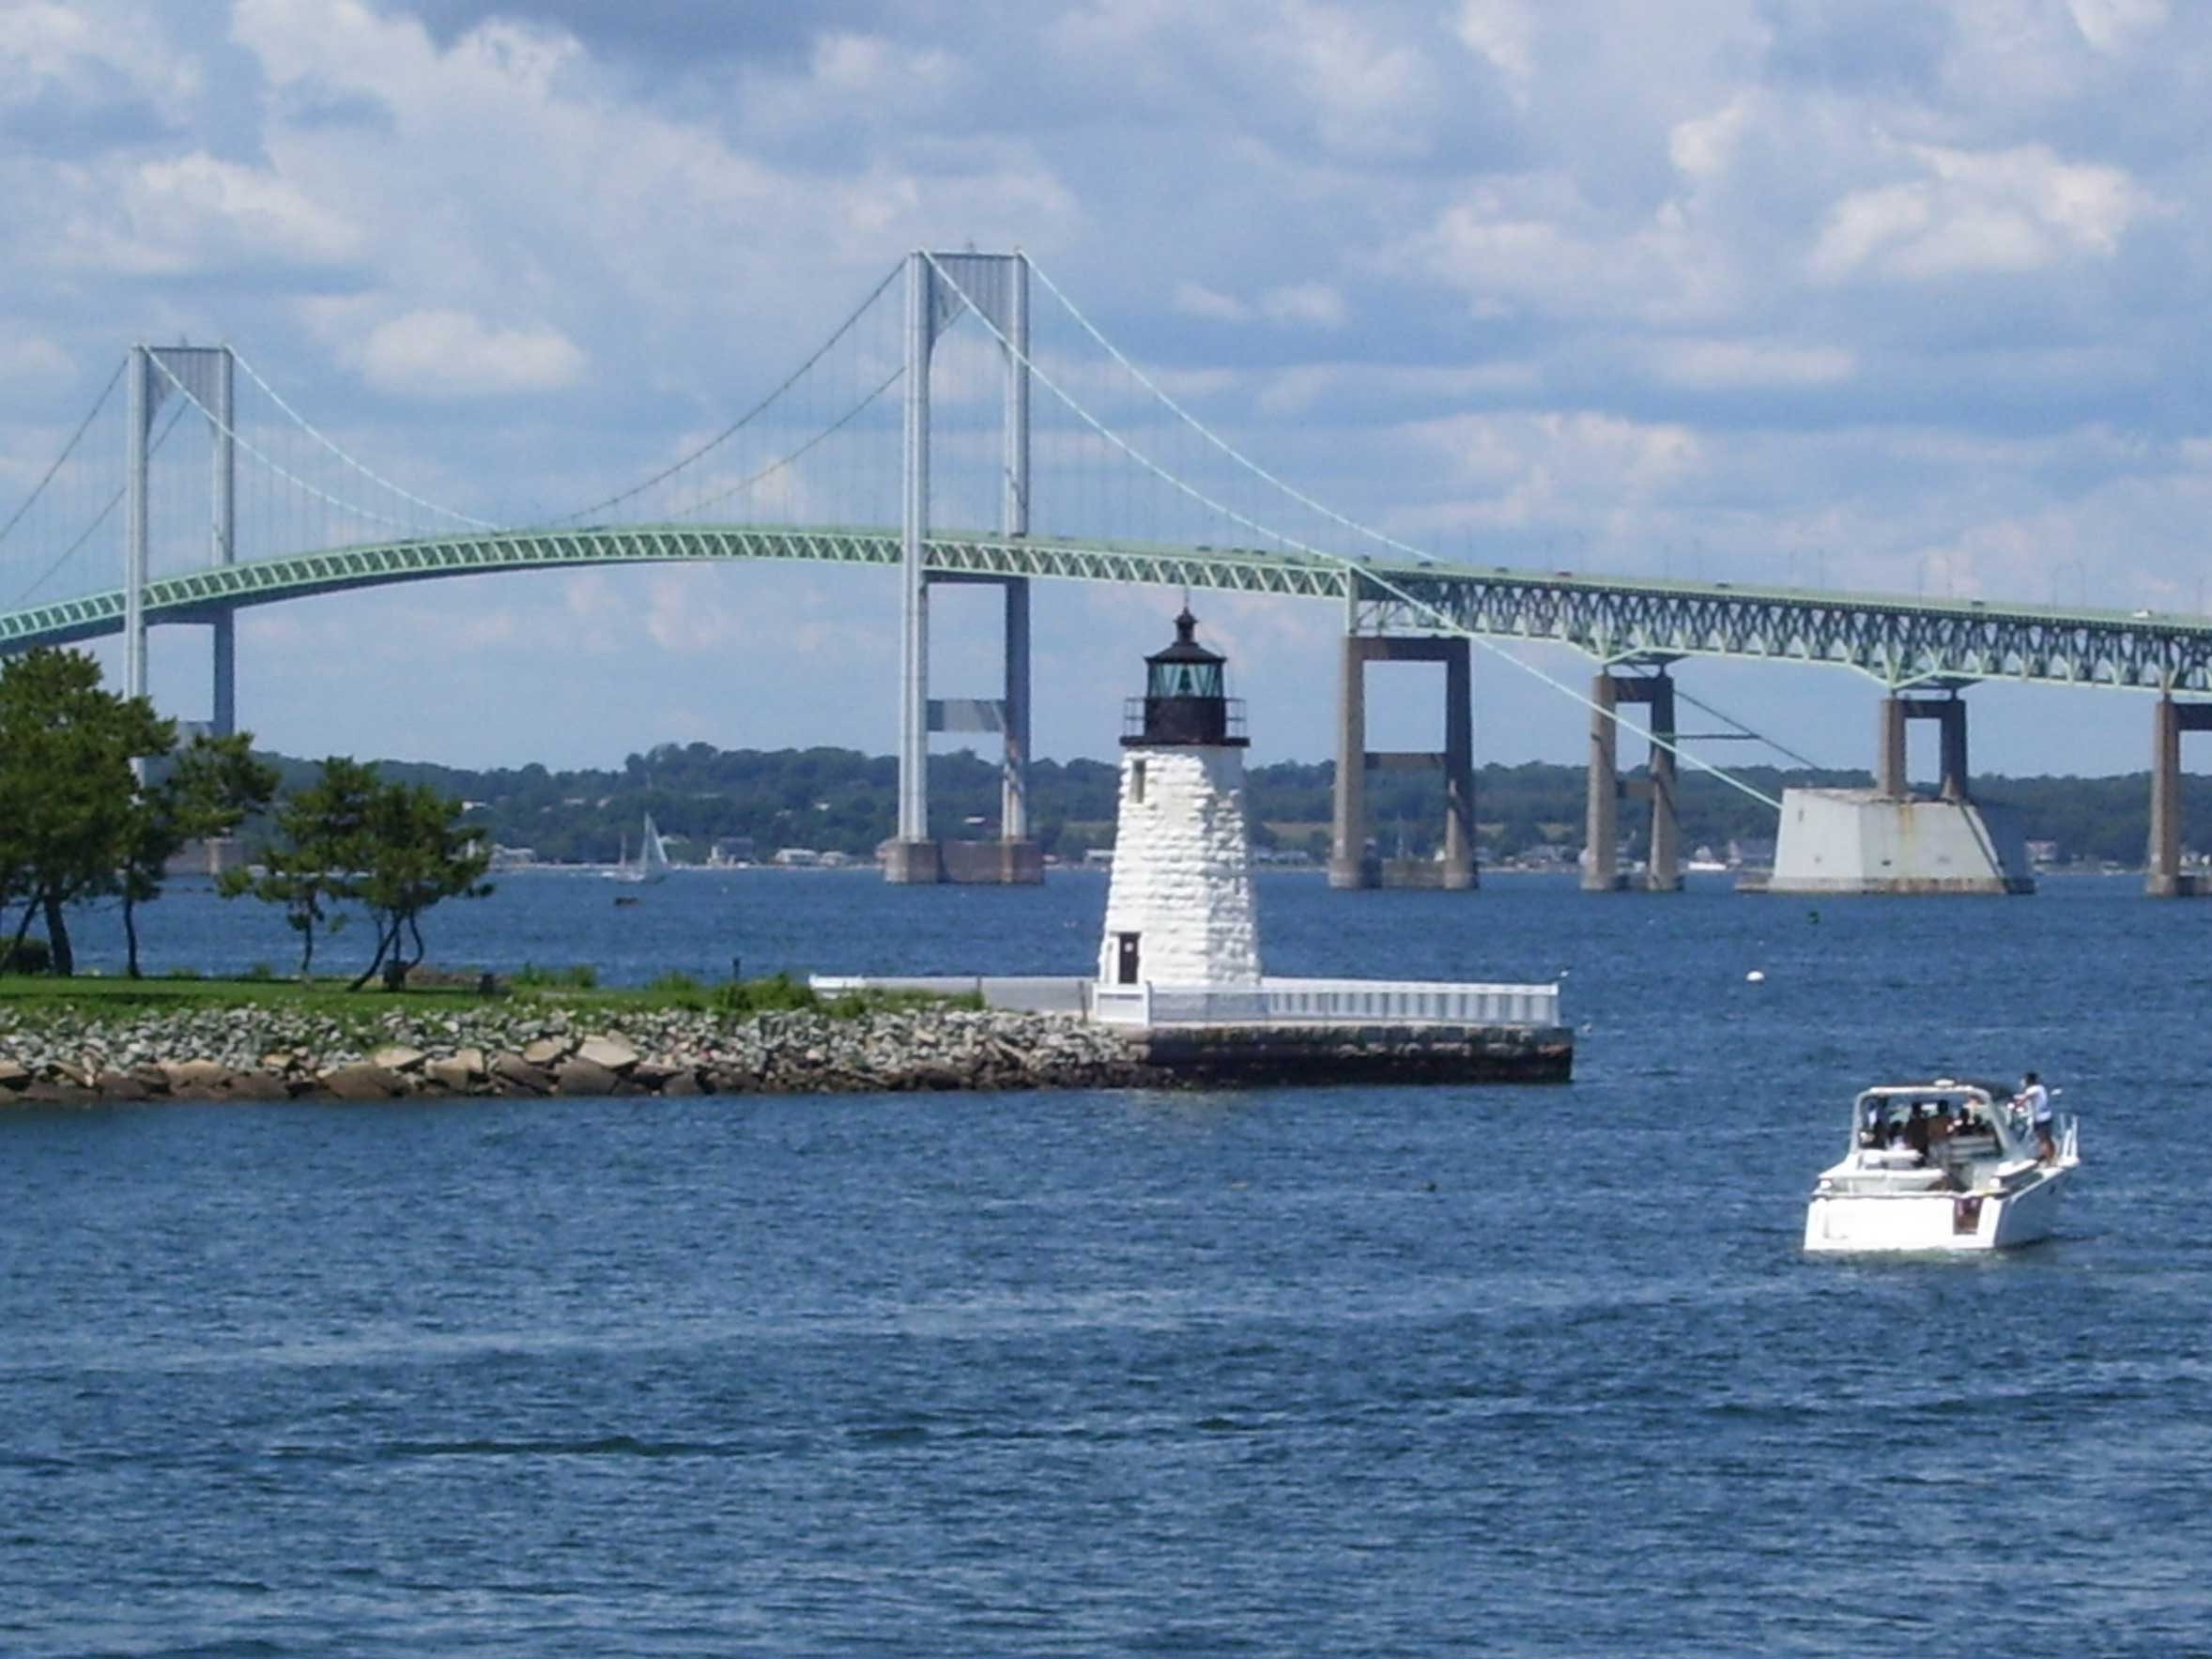 Photograph of the Newport harbor with a lighthouse and Newport bridge in the background